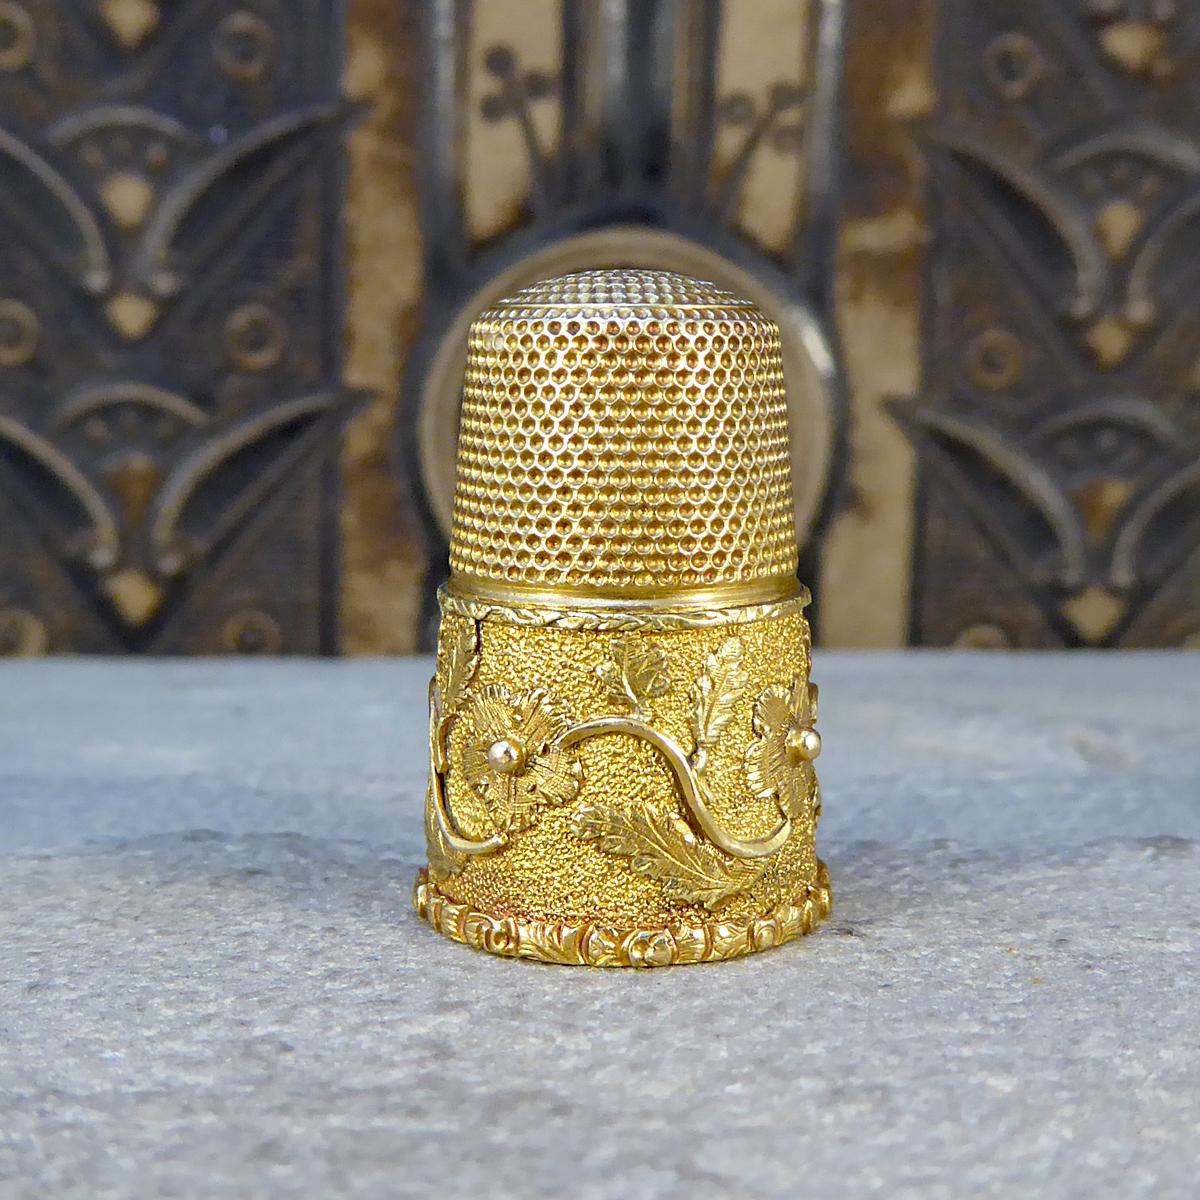 This great antique Victorian Thimble was crafted with such beautiful detail in 15ct yellow Gold. It shows such quality craftsmanship and comes in the original fitted box, the perfect gift for an antique lover.

Condition: Very Good, slightest signs